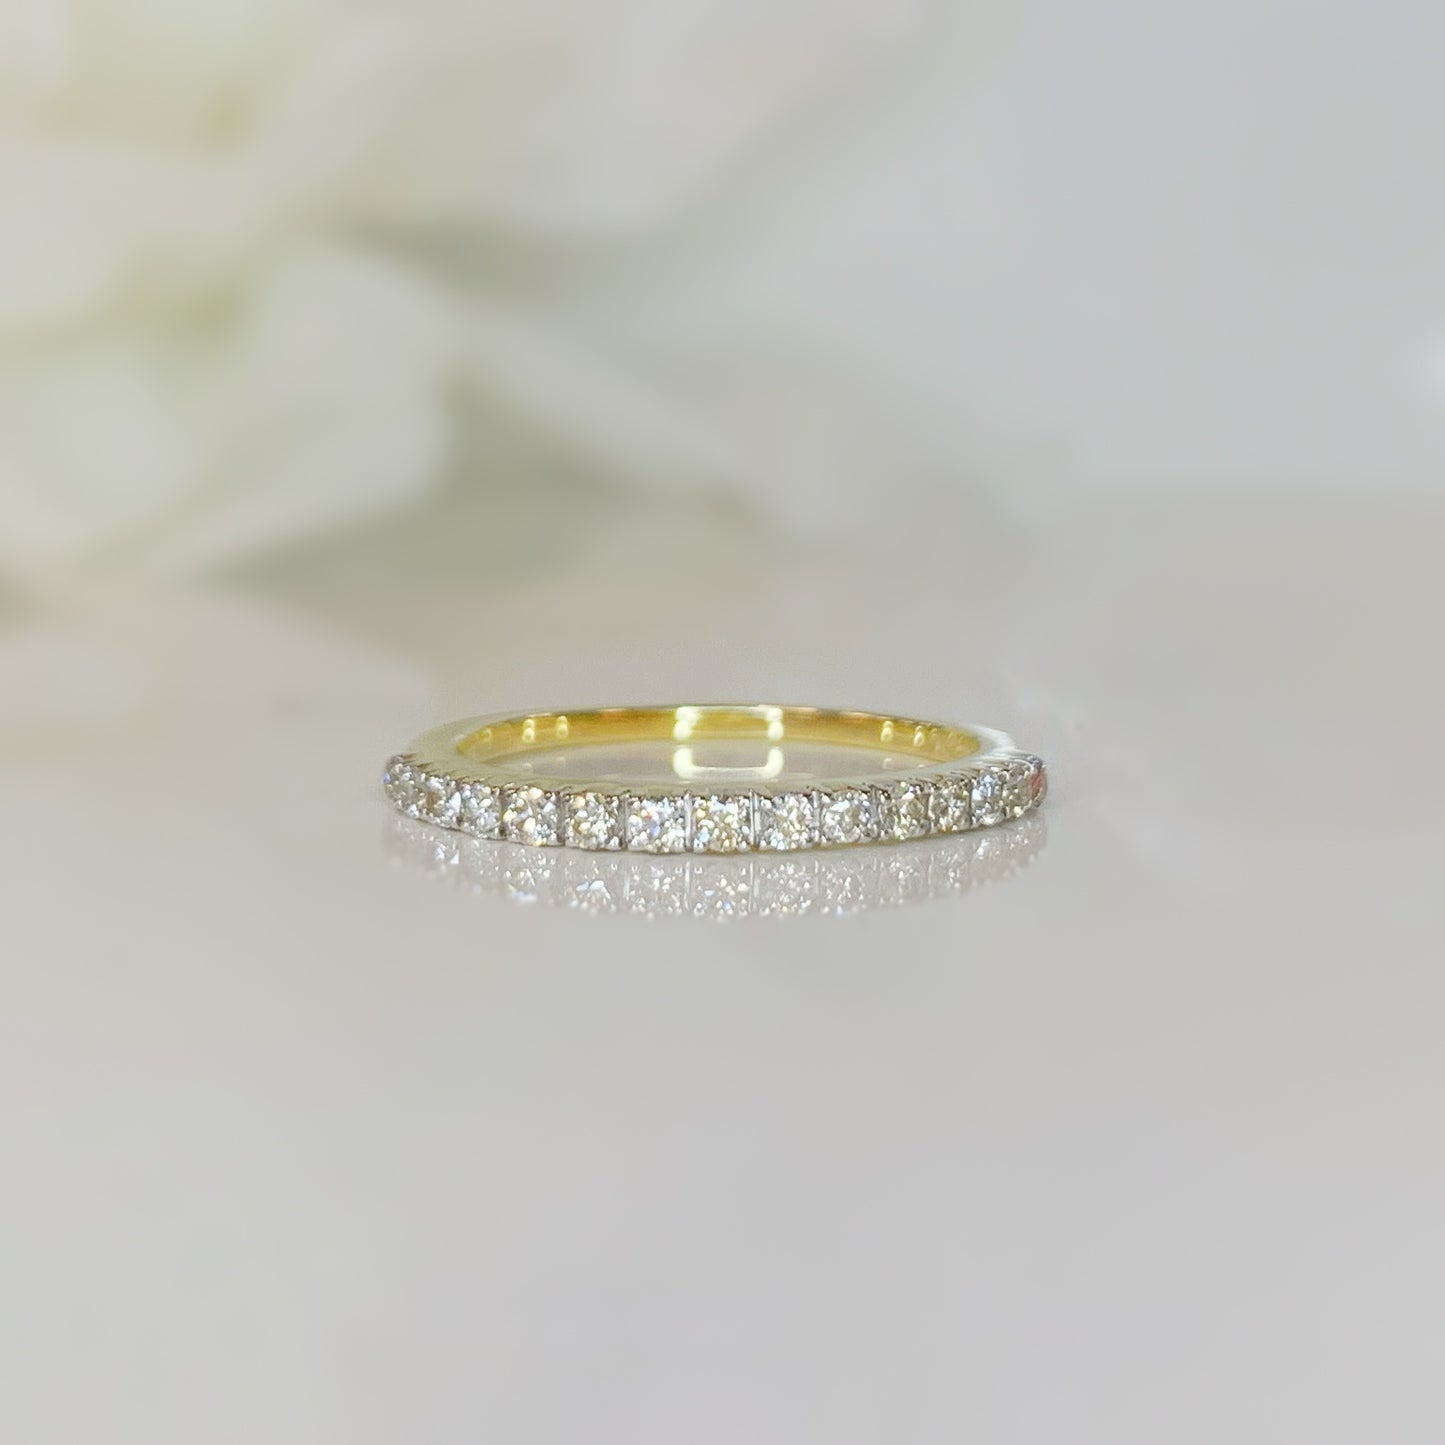 Modern 9ct Yellow Gold And Diamond Half Eternity Ring - SIZE L 1/2